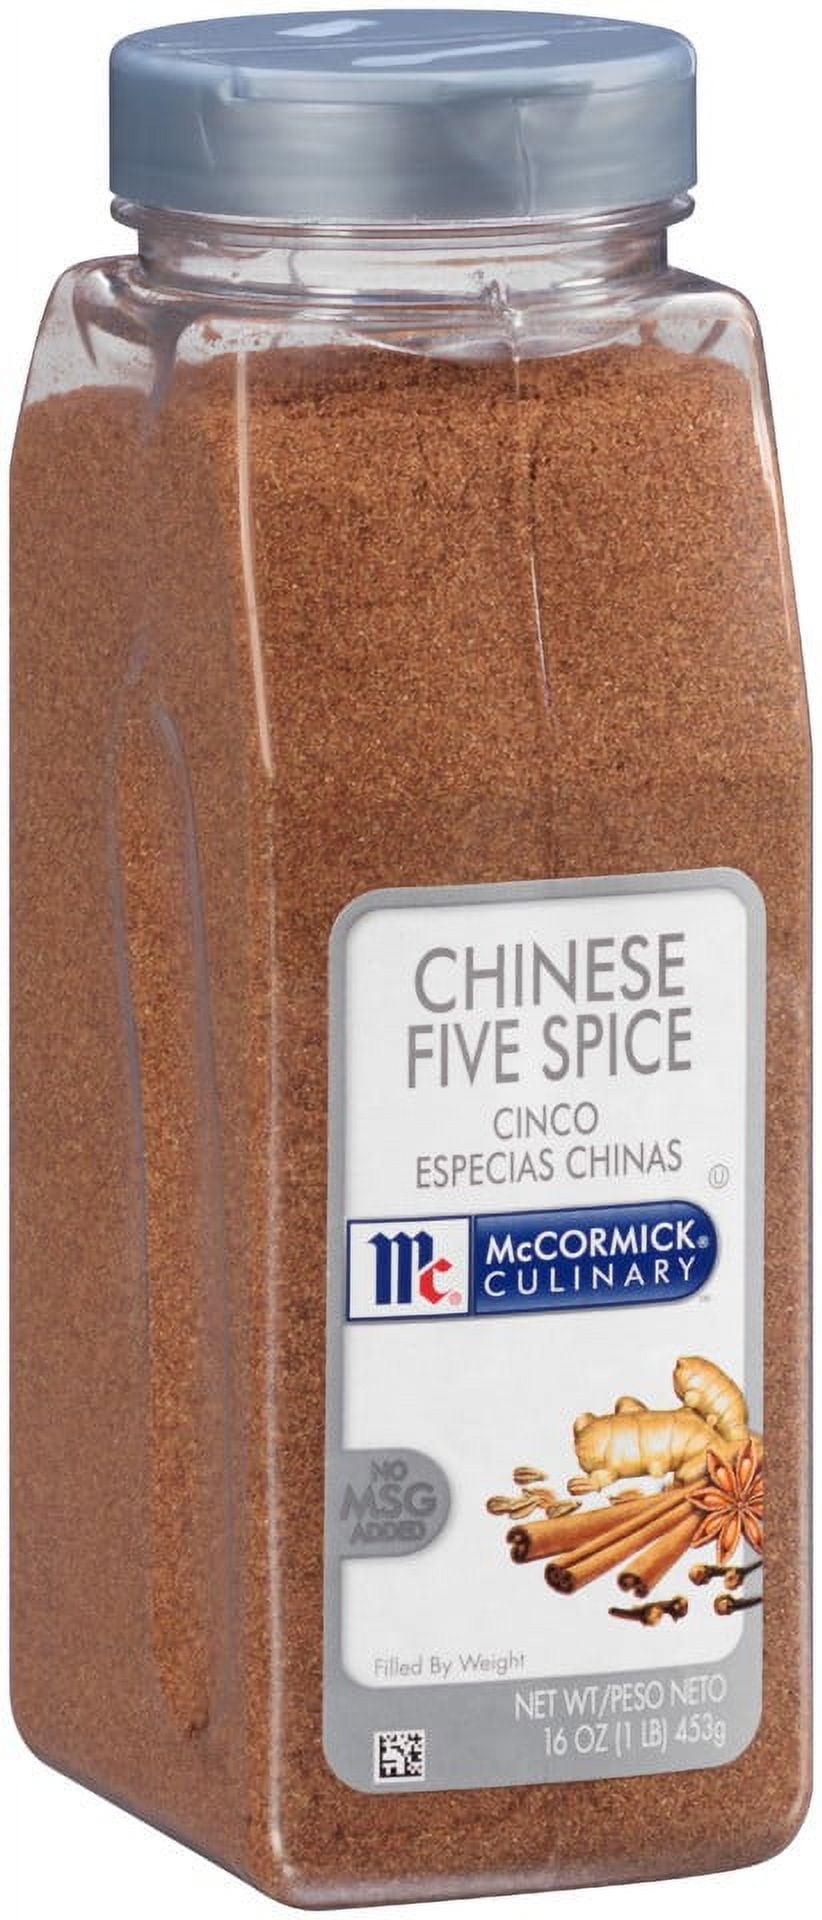 Pereg - Chinese 5 Spice, Mixed Spices 1+